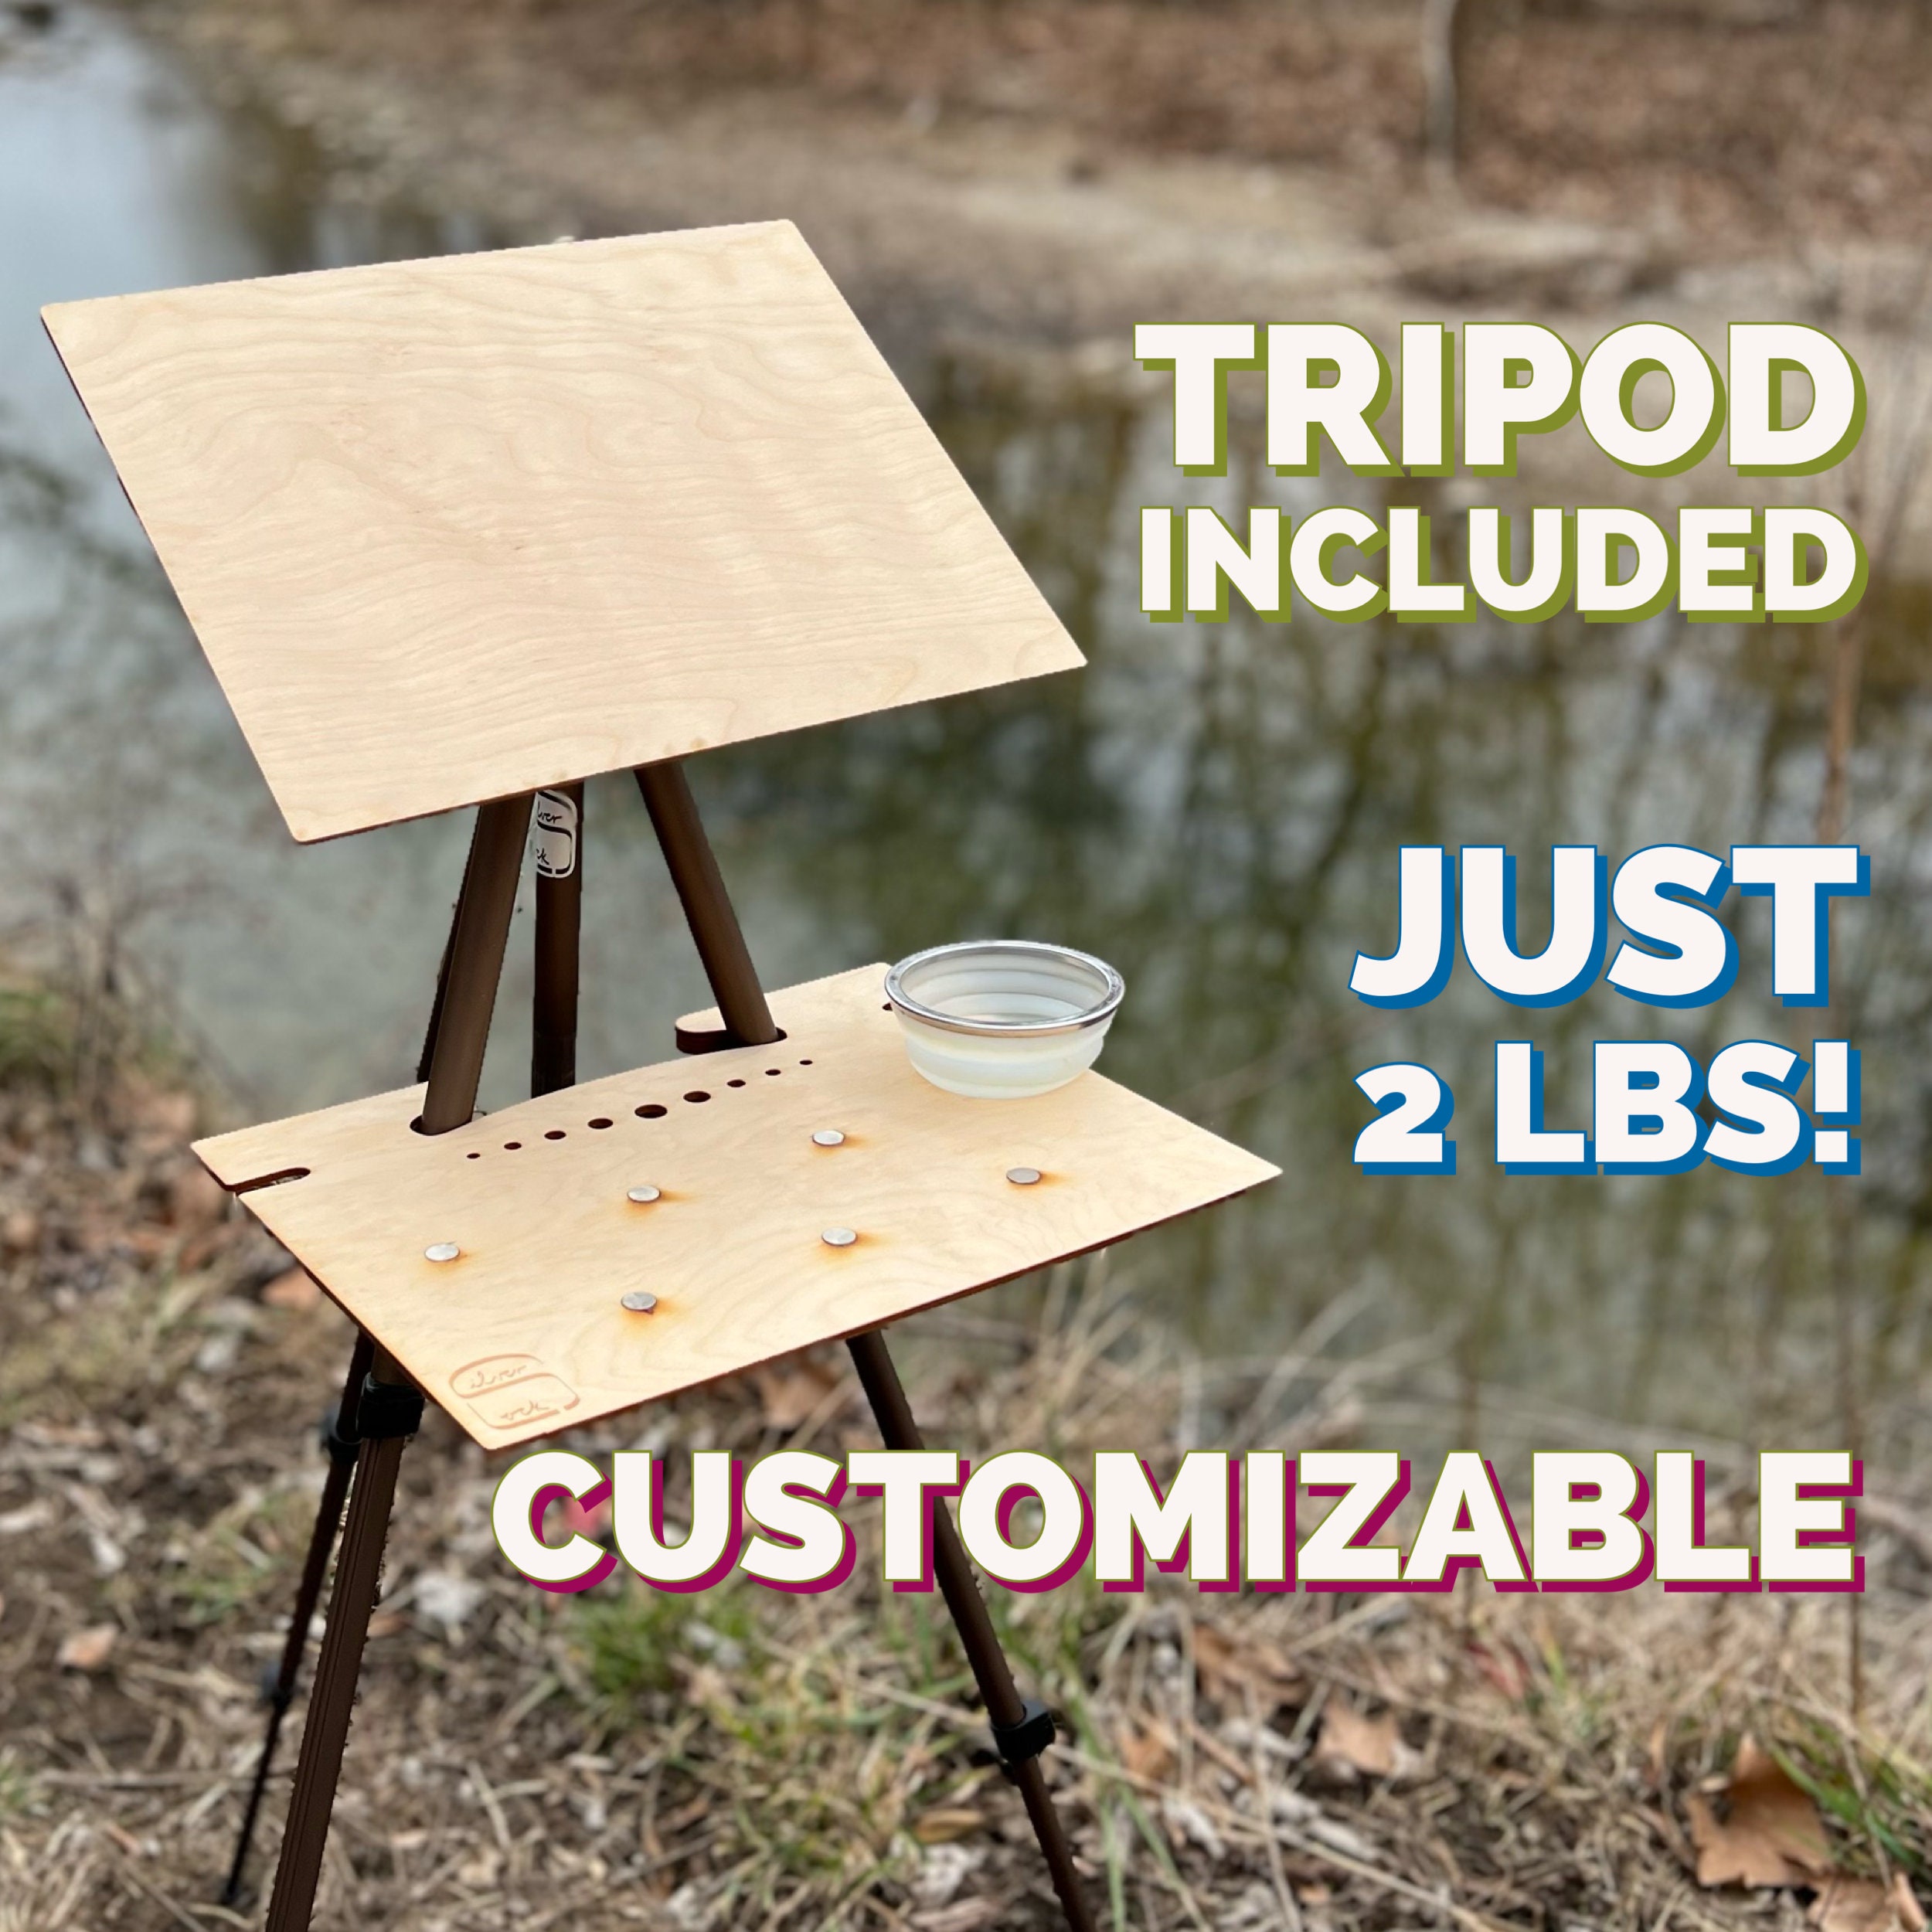 Solid Wood Travel Easel Can Be Tiled Display Can Be Connected to a Tripod  Link Action Camera Gift for the Artist 